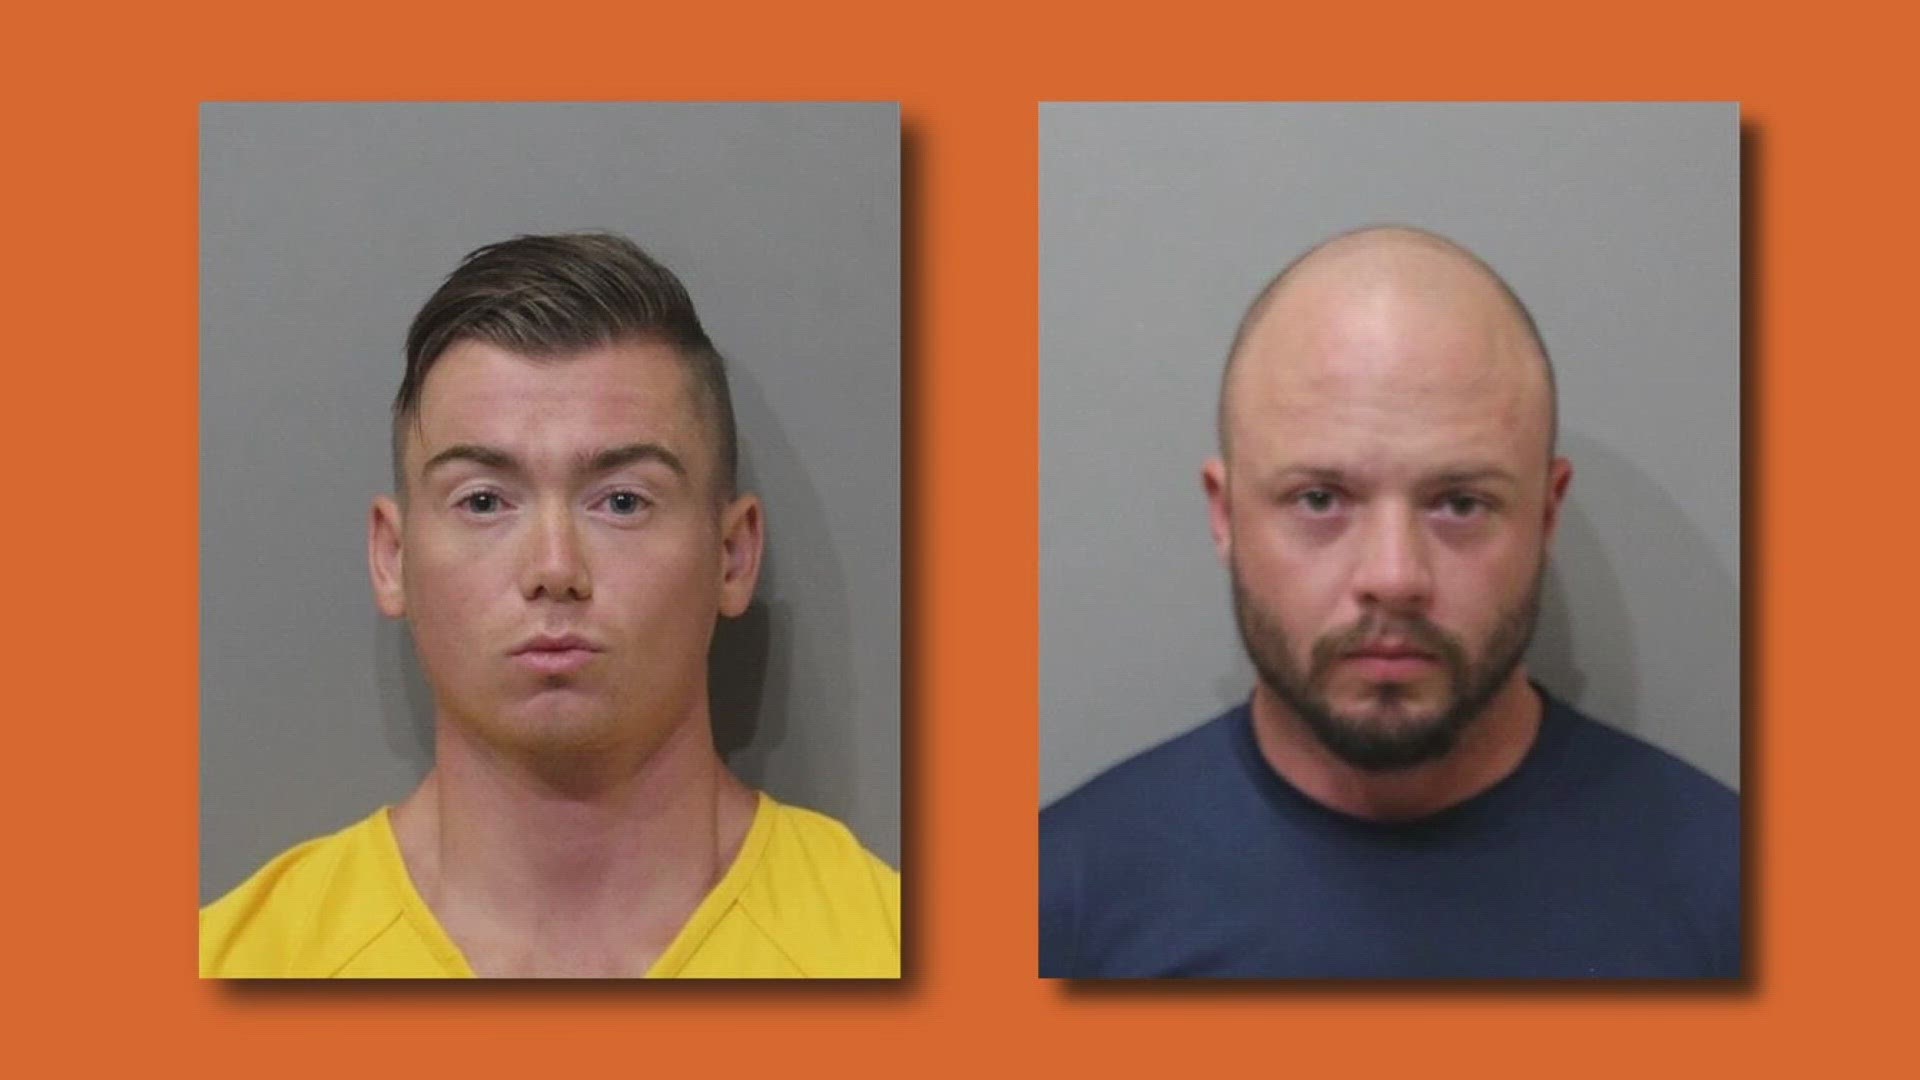 After about three hours of deliberation, the six-person jury returned separate unanimous guilty verdicts for Wesley E. Van Horn and Kieran P. Morris.